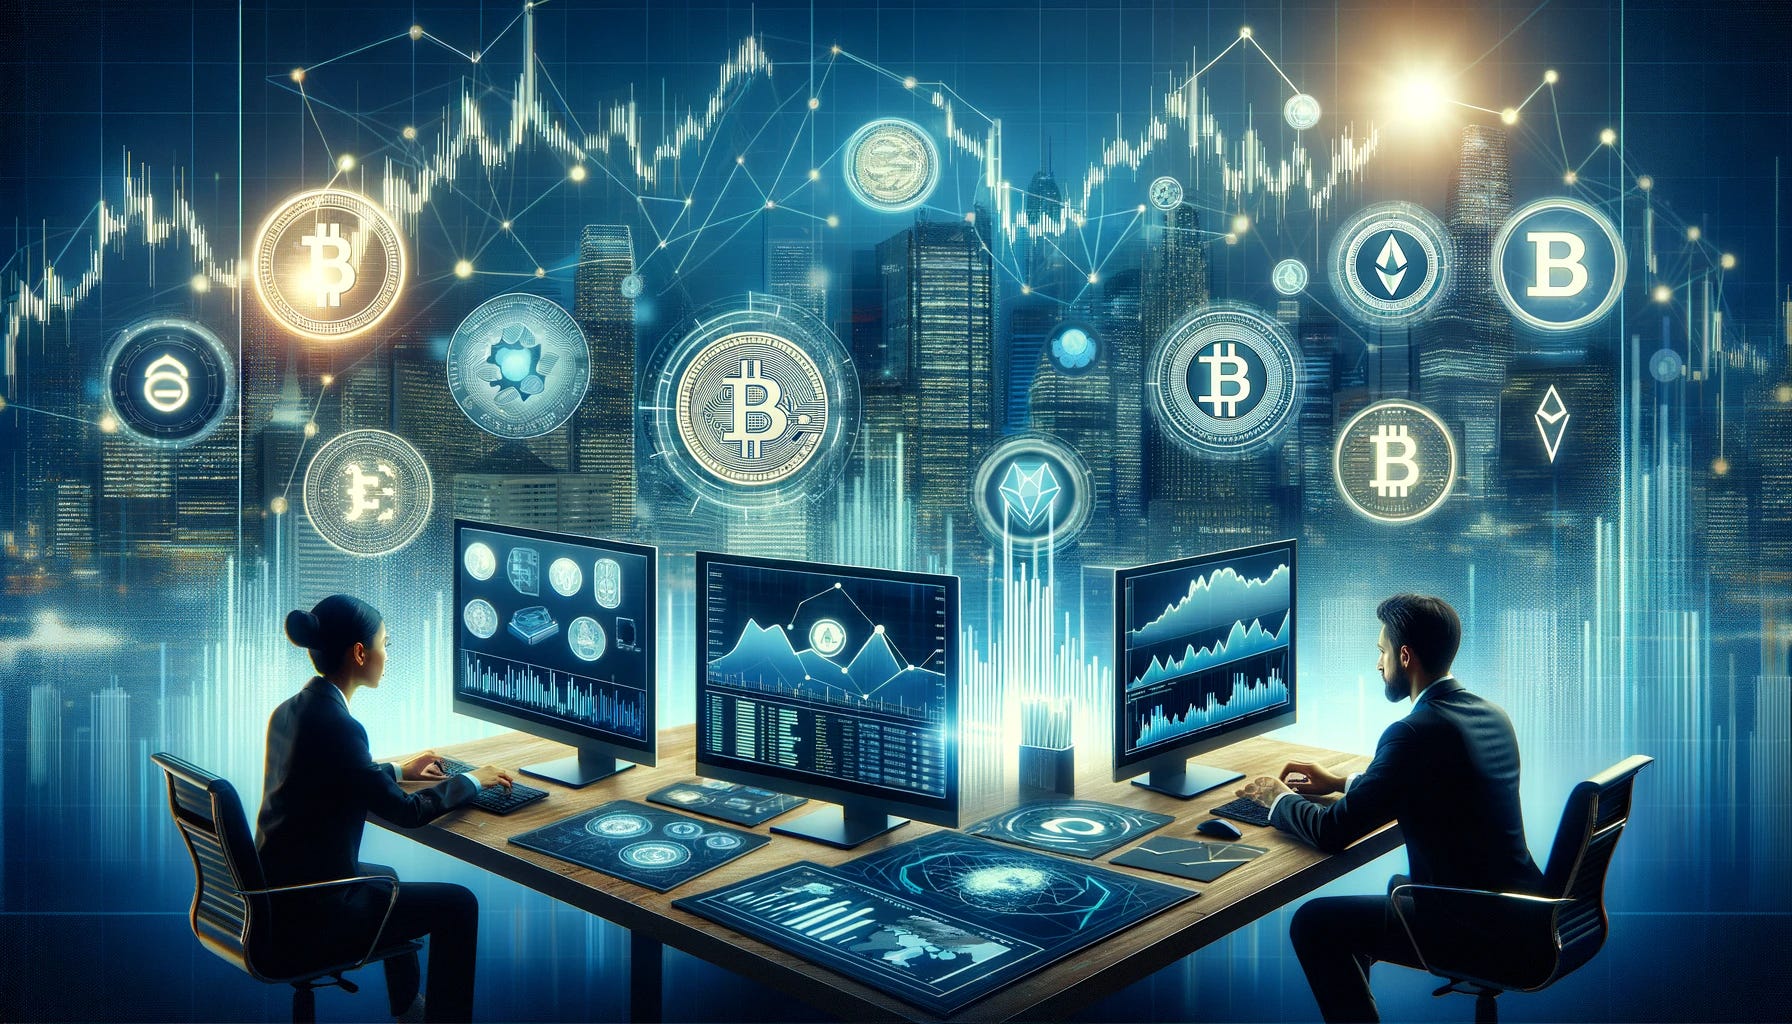 Create a landscape-oriented image that visually represents a token investment fund. The image should depict a modern and sophisticated financial environment, where various digital tokens (representing cryptocurrencies and other digital assets) are being actively managed and invested. The scene could include a dynamic dashboard with rising and falling graphs, digital screens displaying market data, and representations of different tokens, symbolizing the diverse portfolio of the investment fund. Financial professionals or AI systems might be seen analyzing the data, making decisions to optimize the fund's performance. The overall aesthetic should convey the innovative and digital nature of token investment, highlighting the blend of technology and finance in the modern investment landscape.